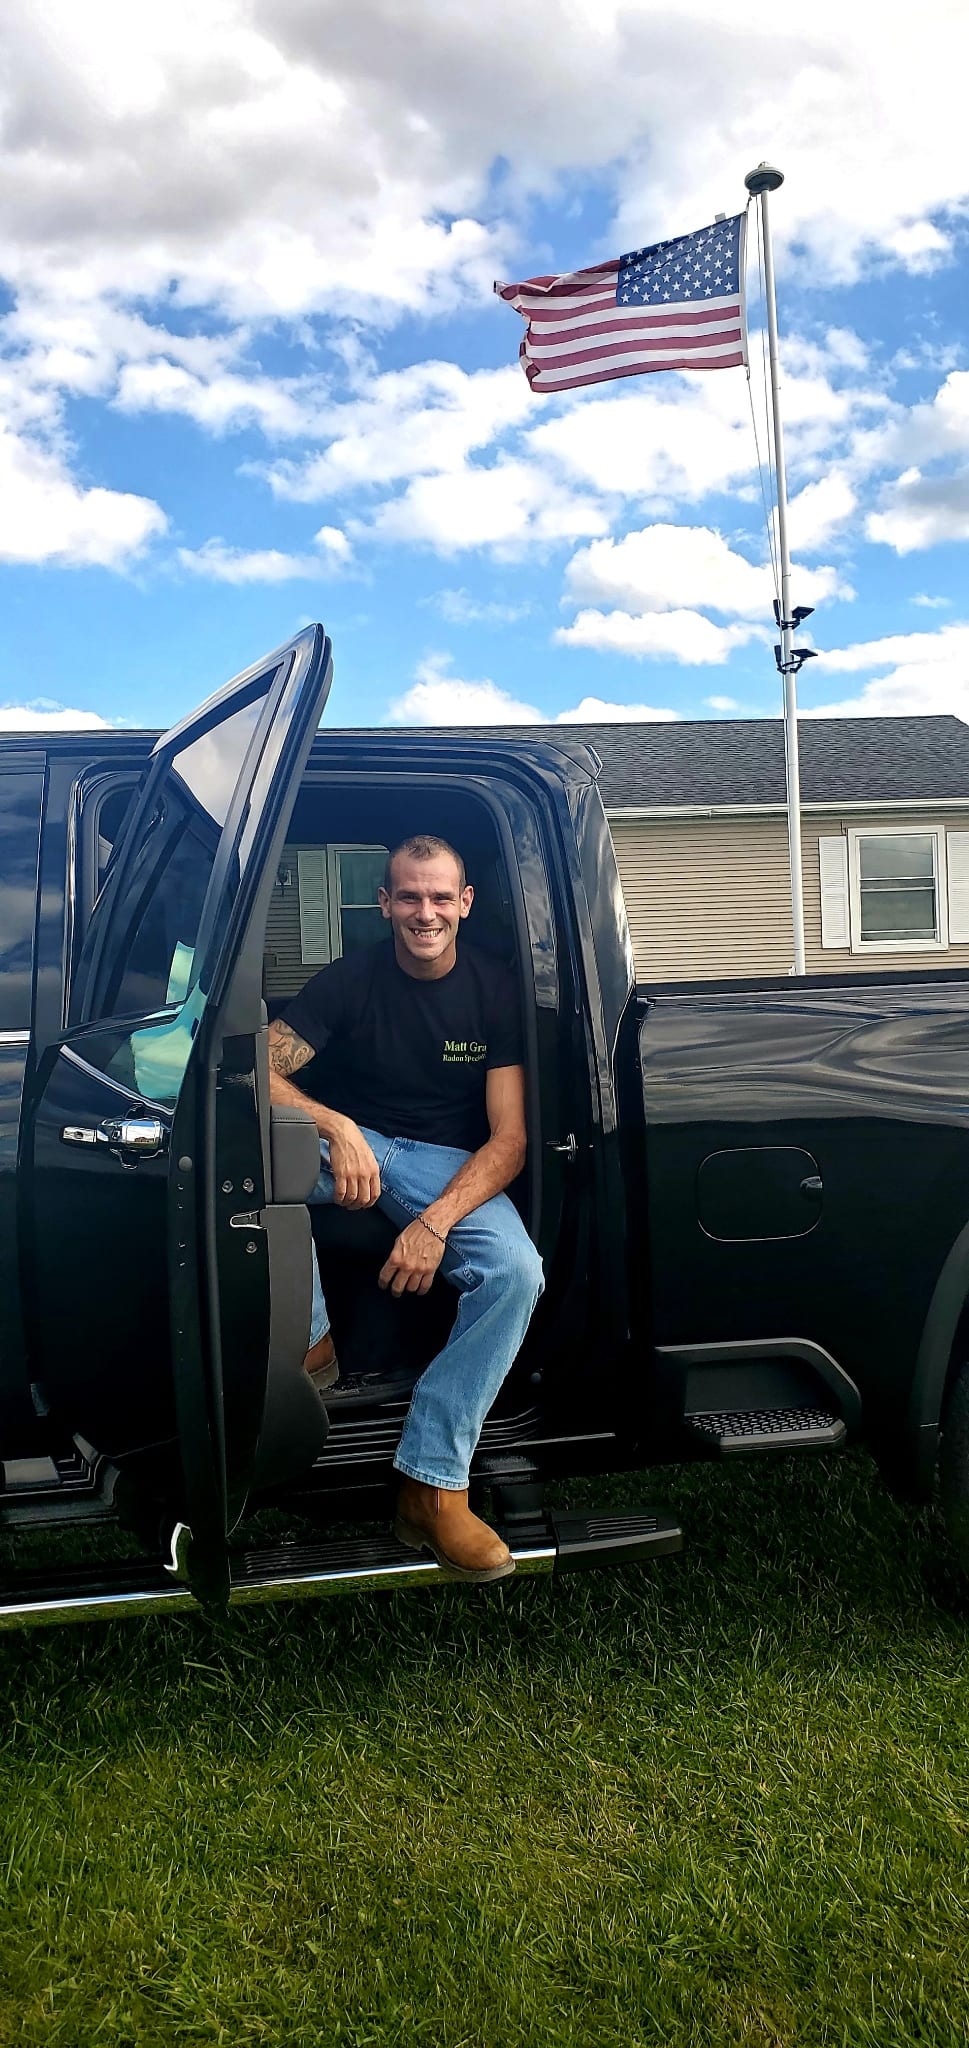 Radon Company - Matthew Gray sitting in truck in front of American flag